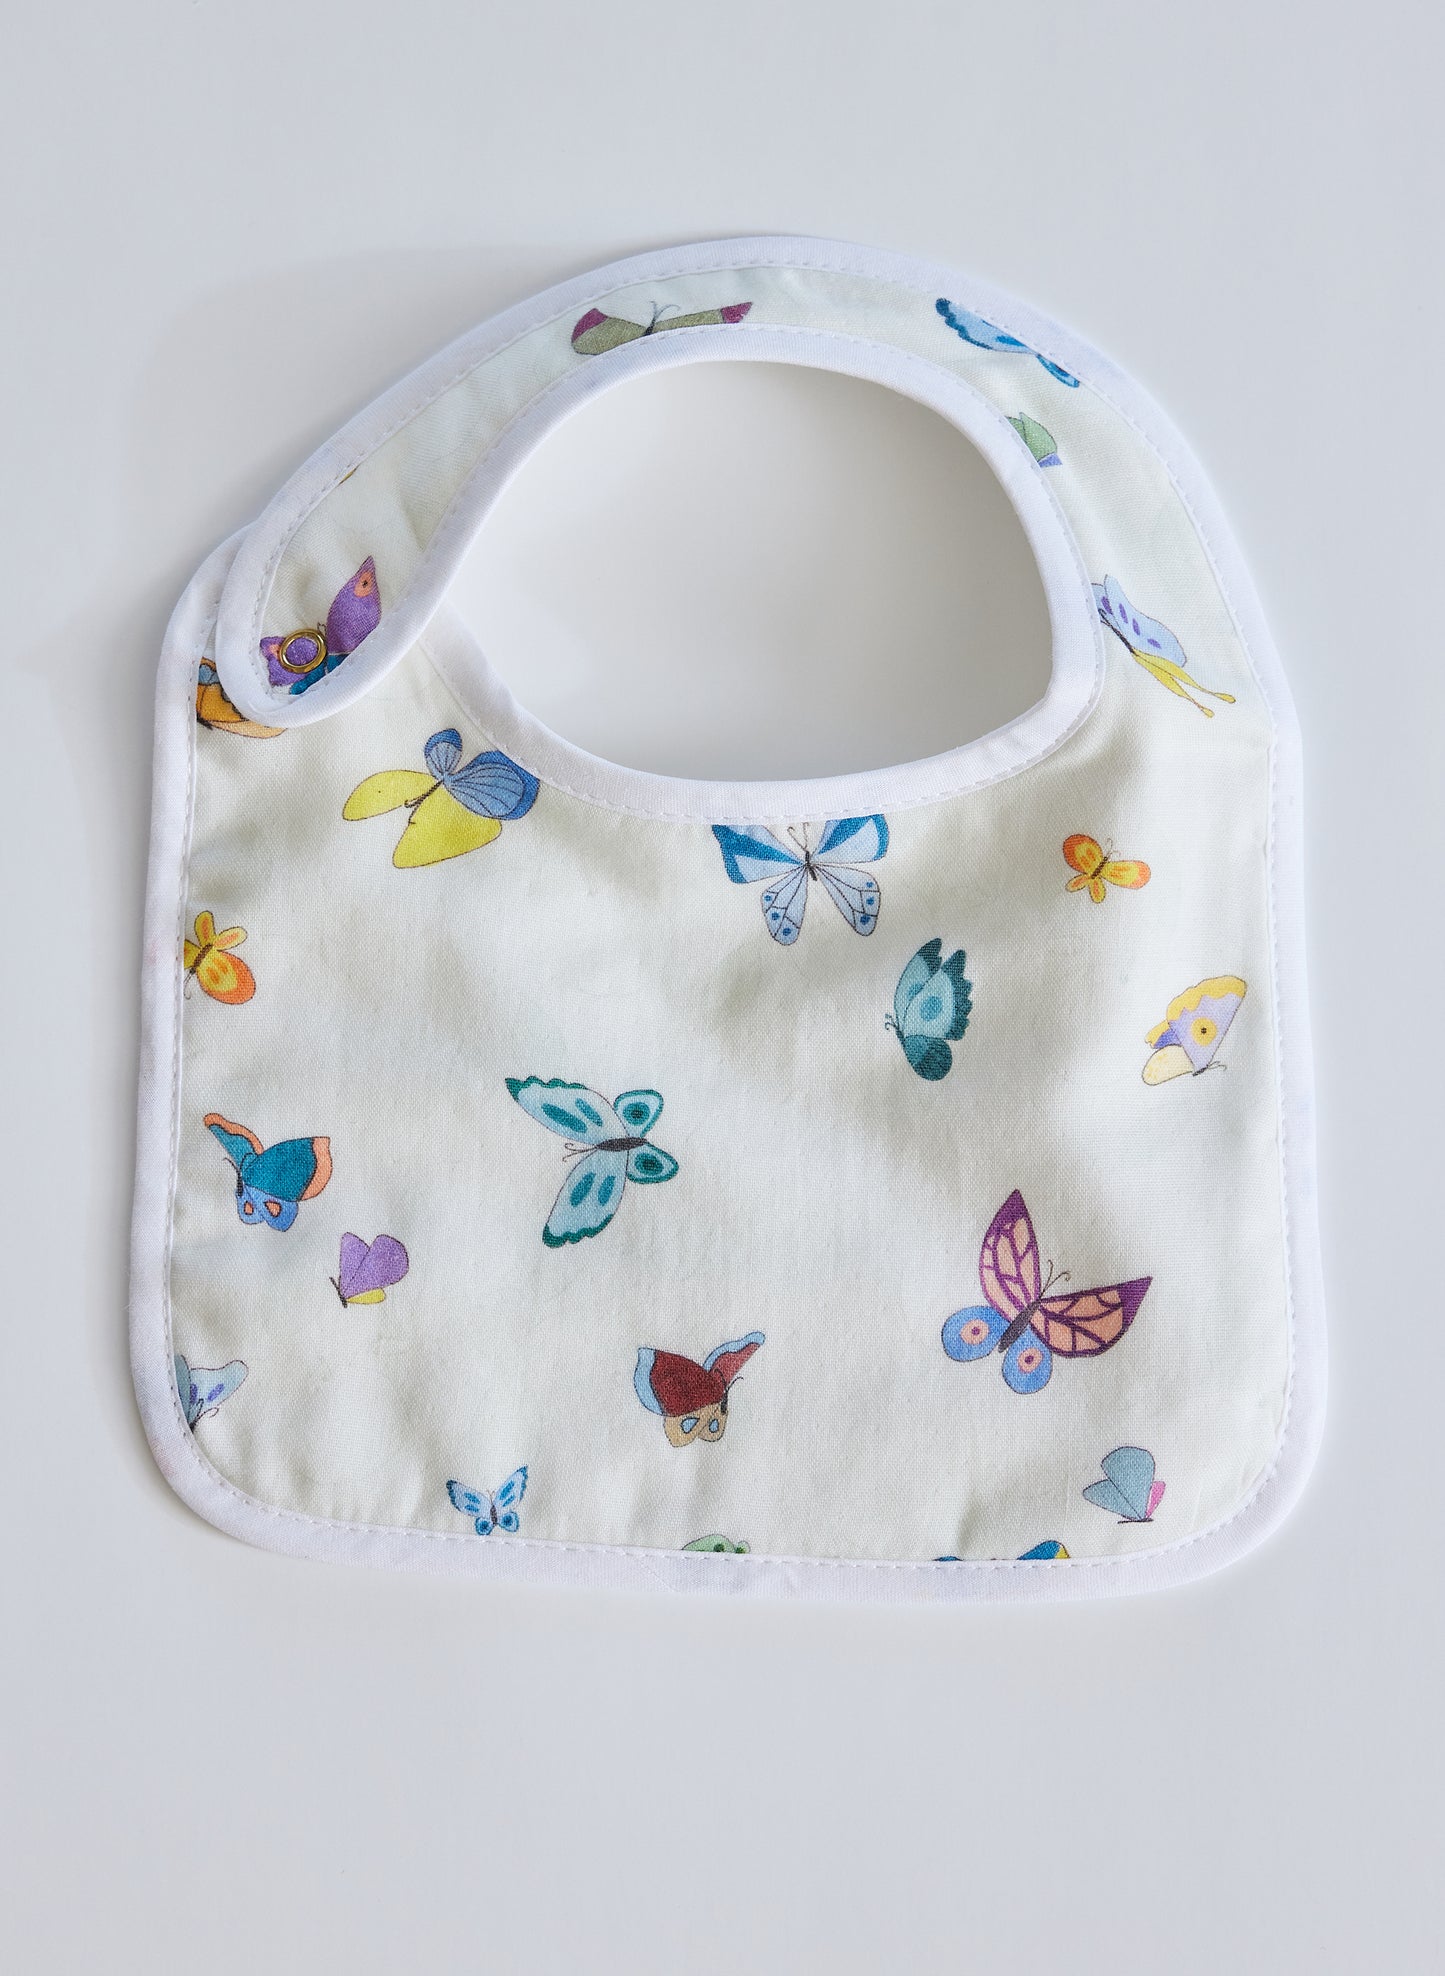 Madame Butterfly Bib and Embroidered Butterfly Shawl Blanket Set